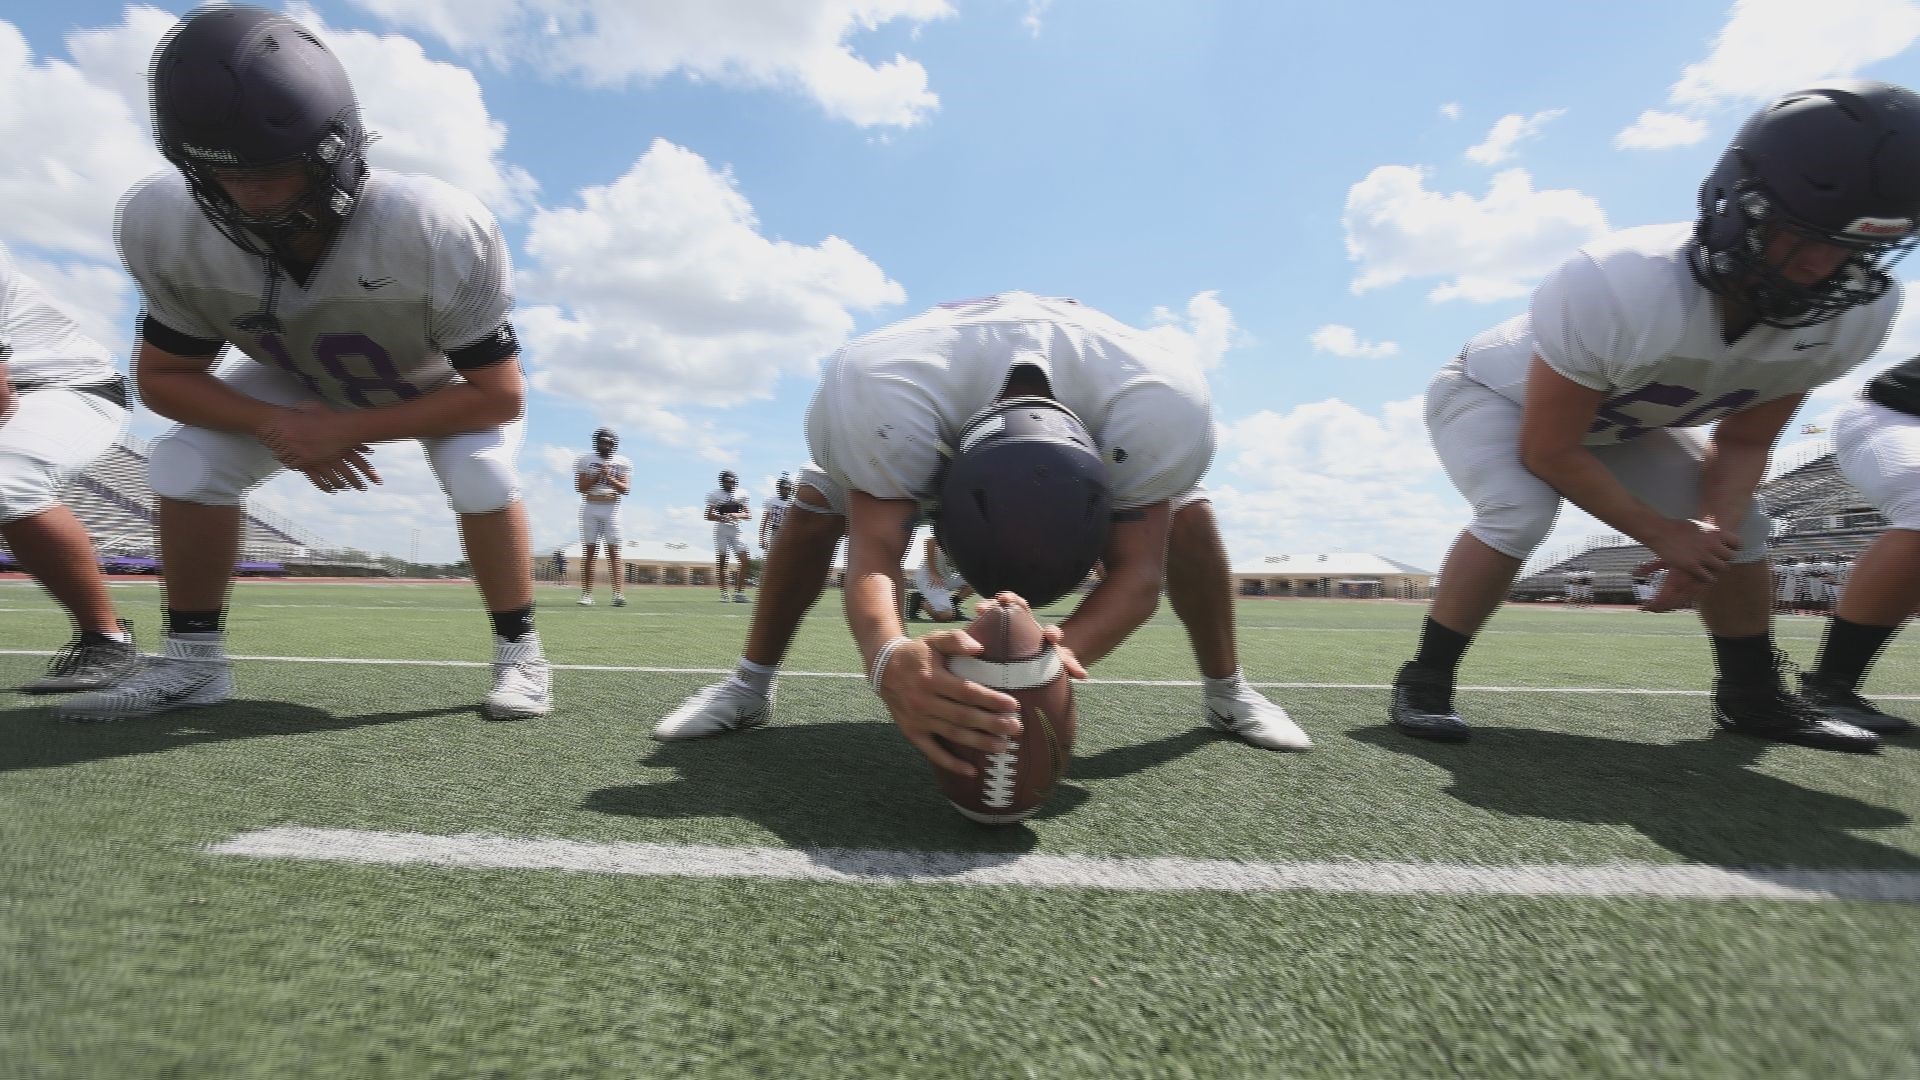 For the first week, KVUE visited Liberty Hill High School. Liberty Hill opens its 2021 season against Ellison High School.